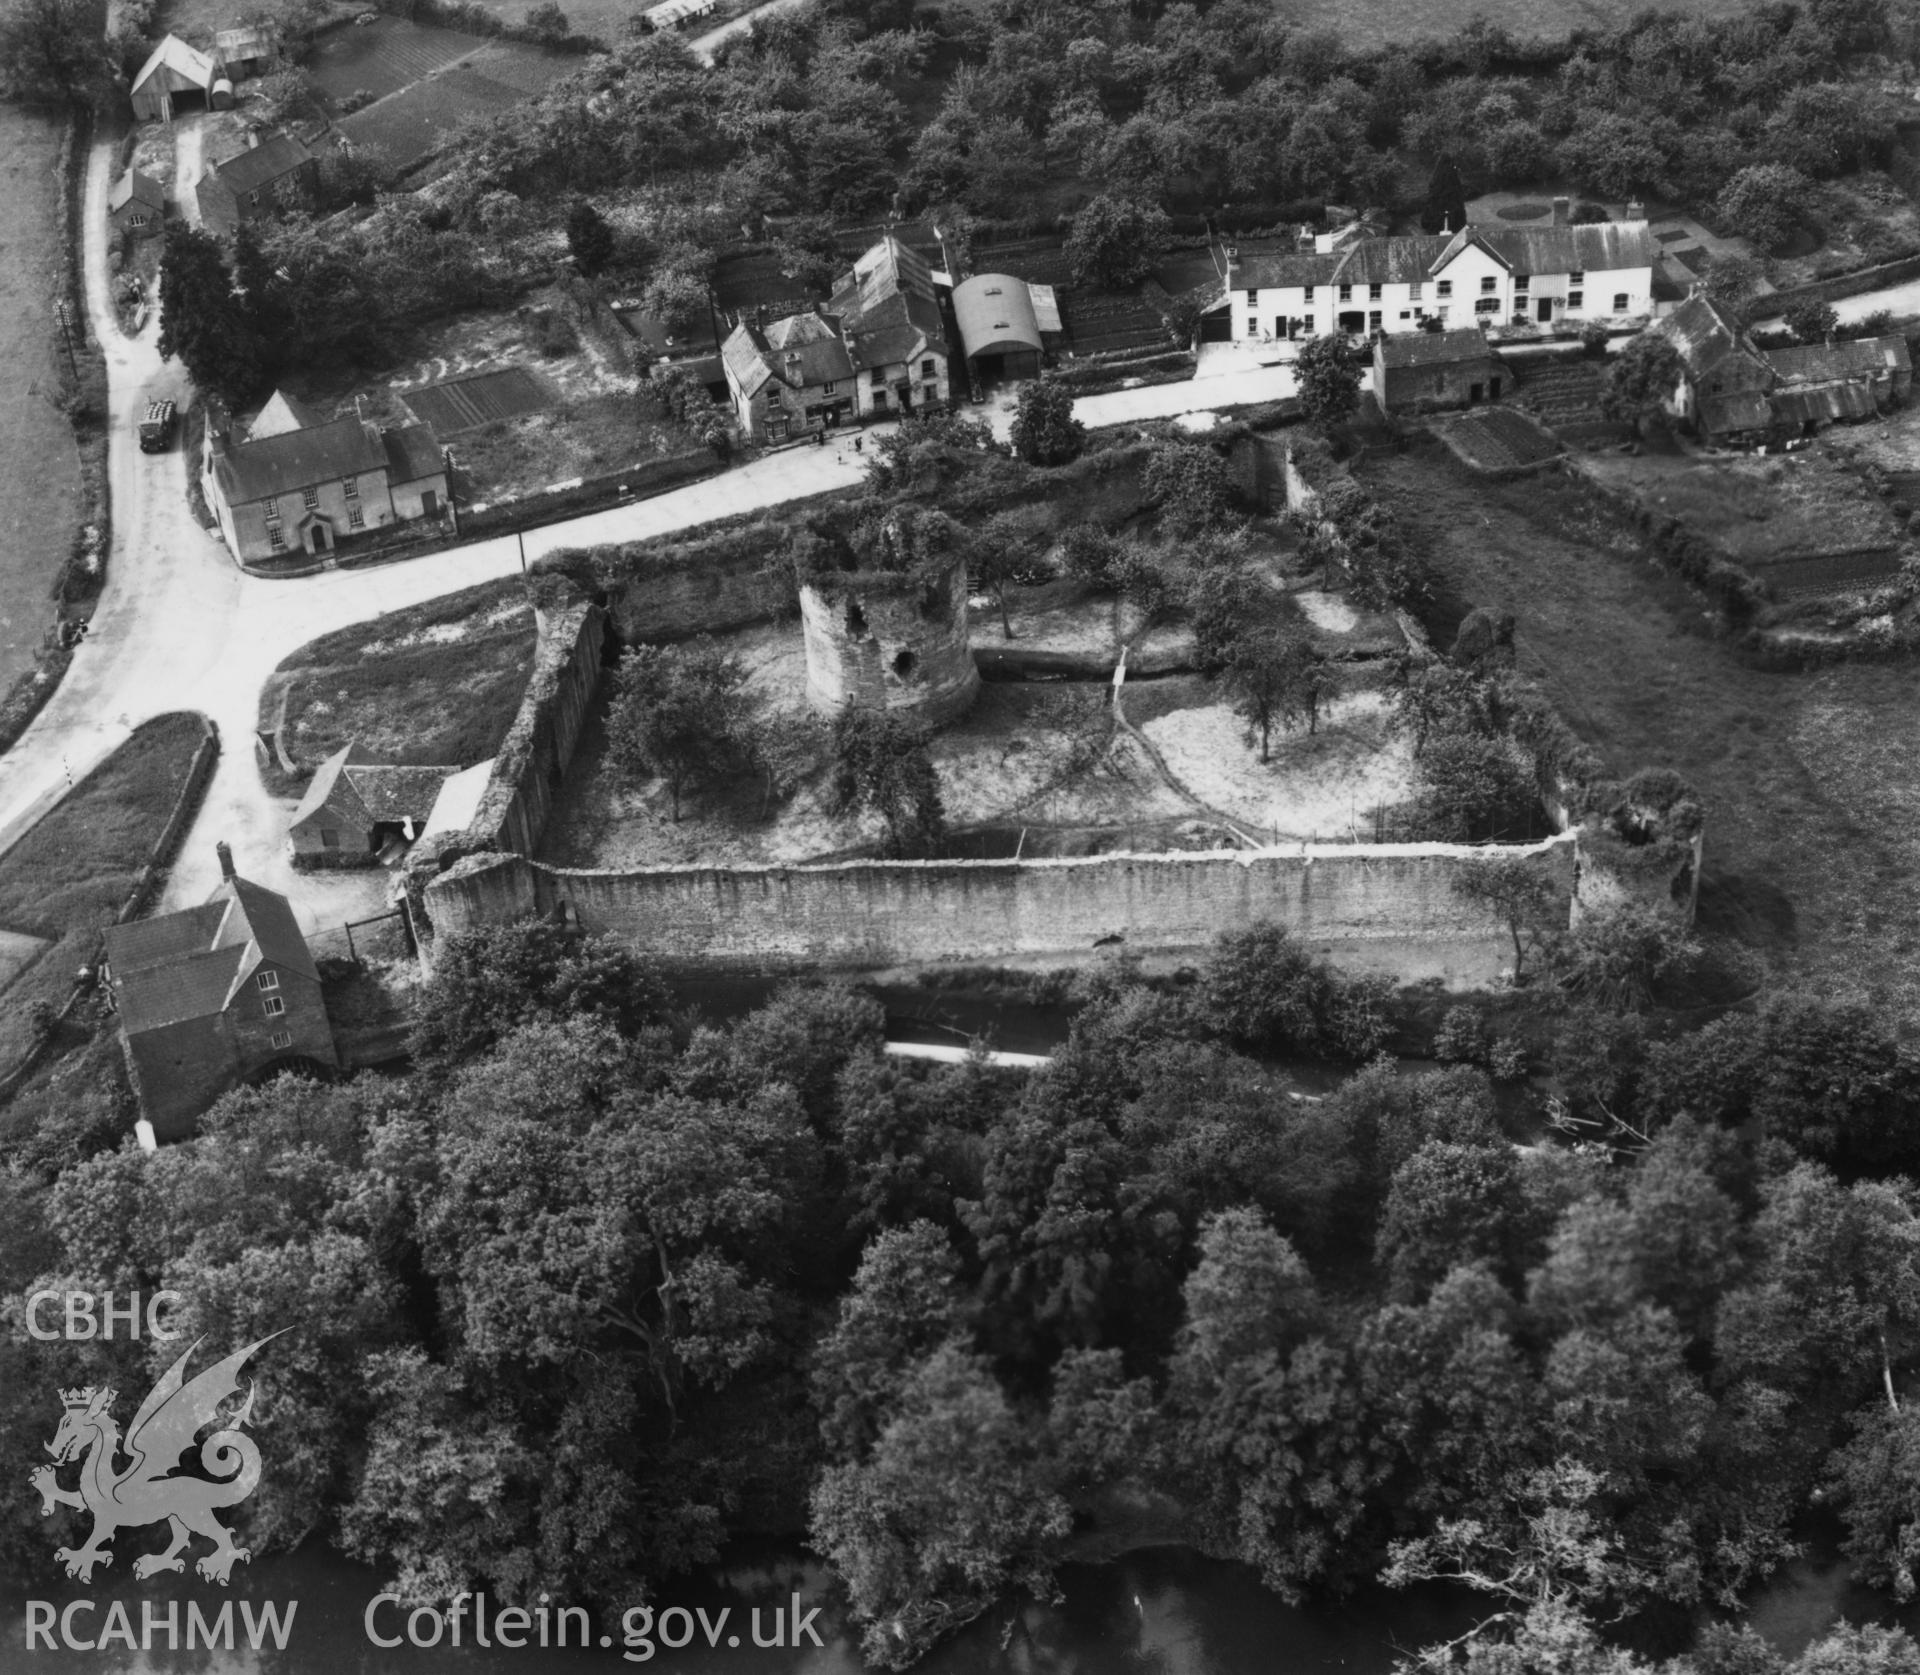 View of Skenfrith showing castle and lorry. Oblique aerial photograph, 5?" cut roll film.